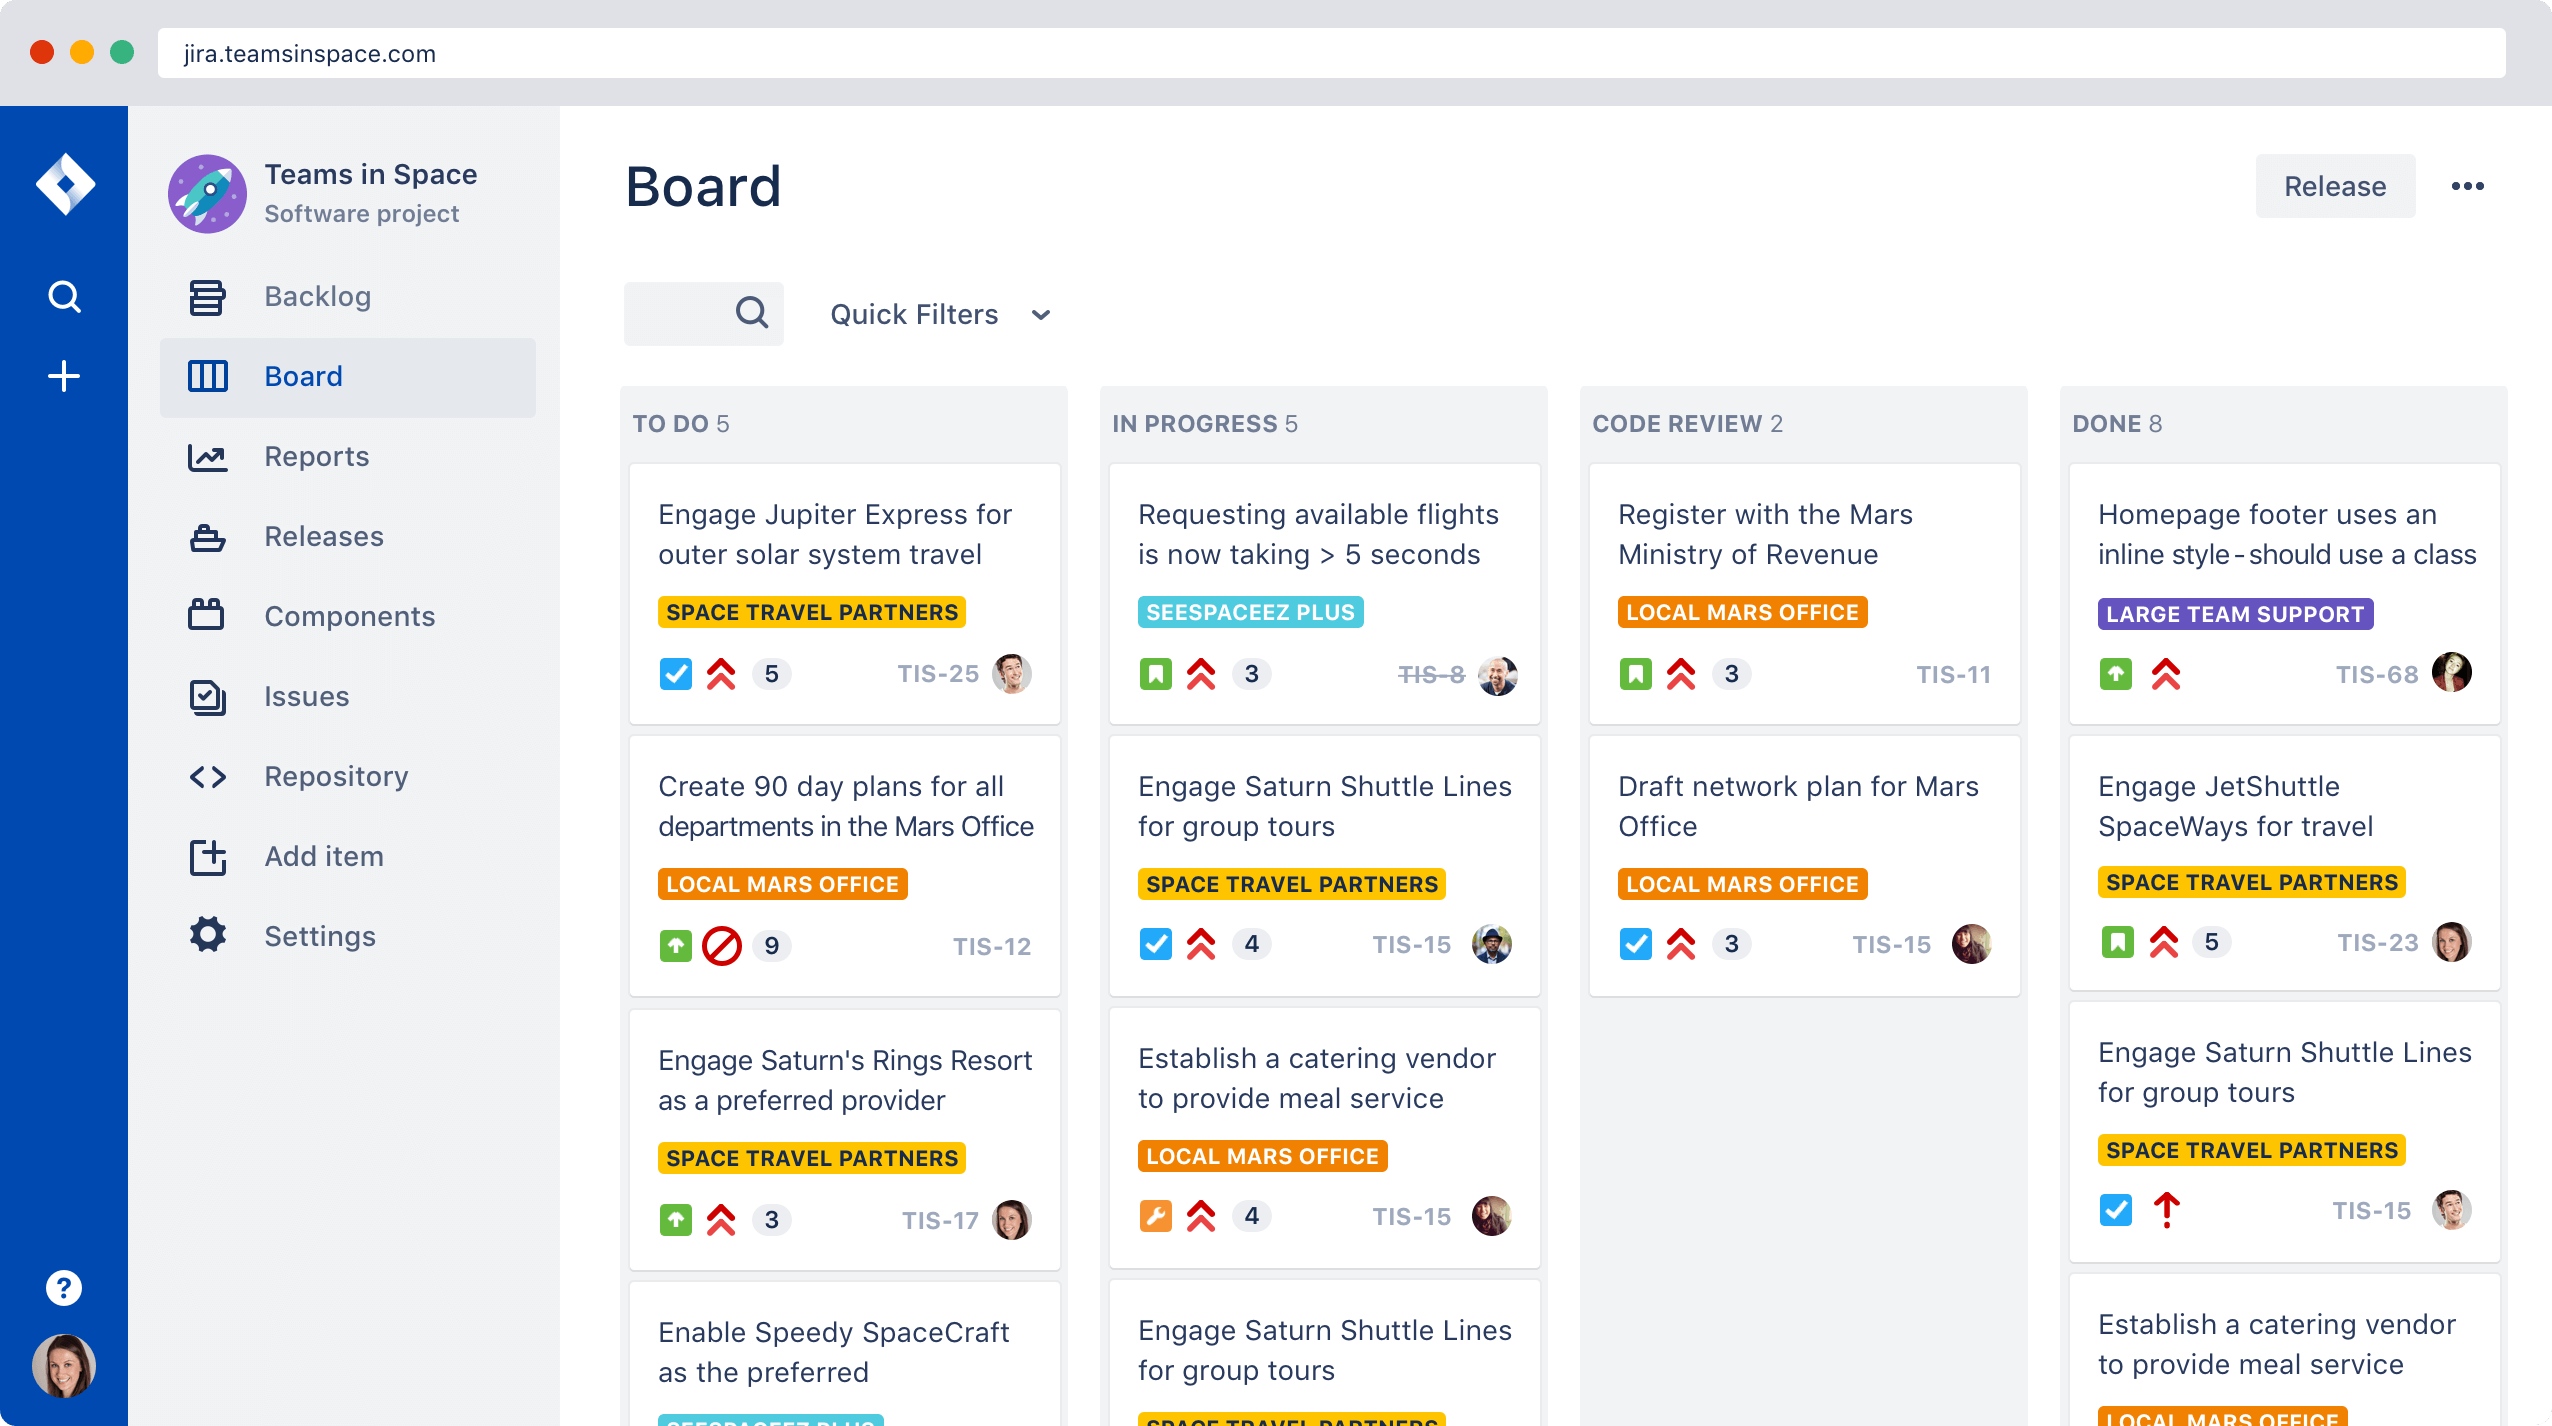 Jira was created as a specific tool for software developers